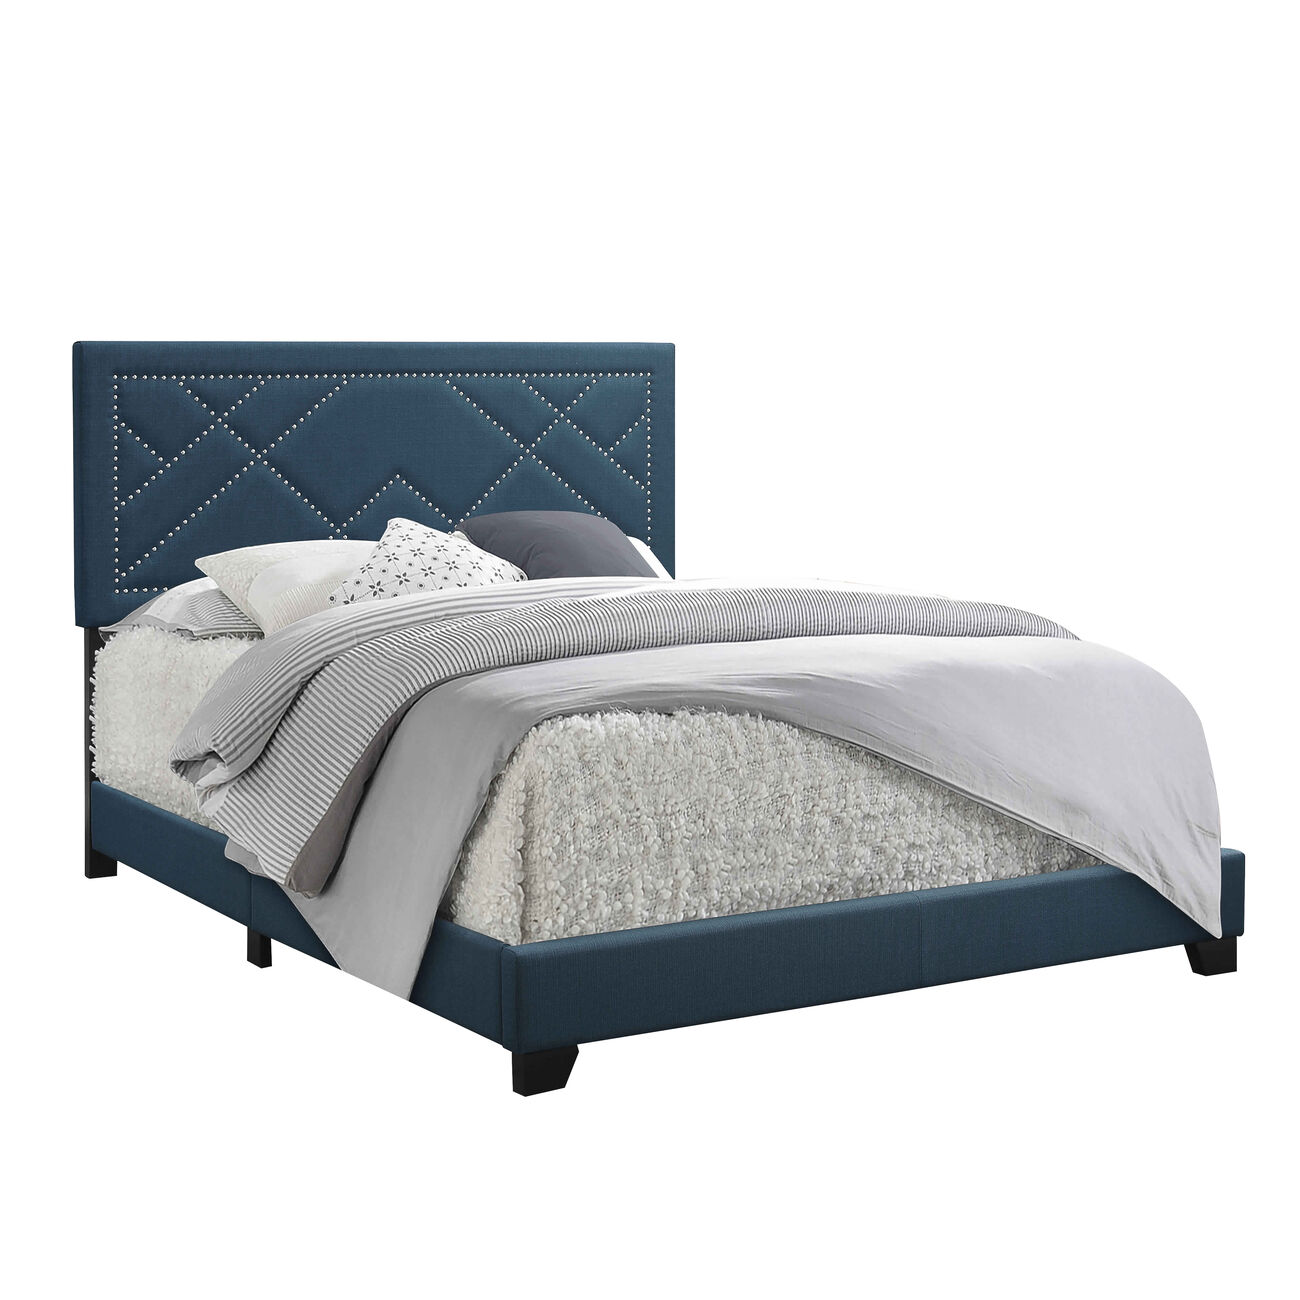 Fabric Eastern King Bed with Geometric Pattern Nailhead Trims, Teal Blue